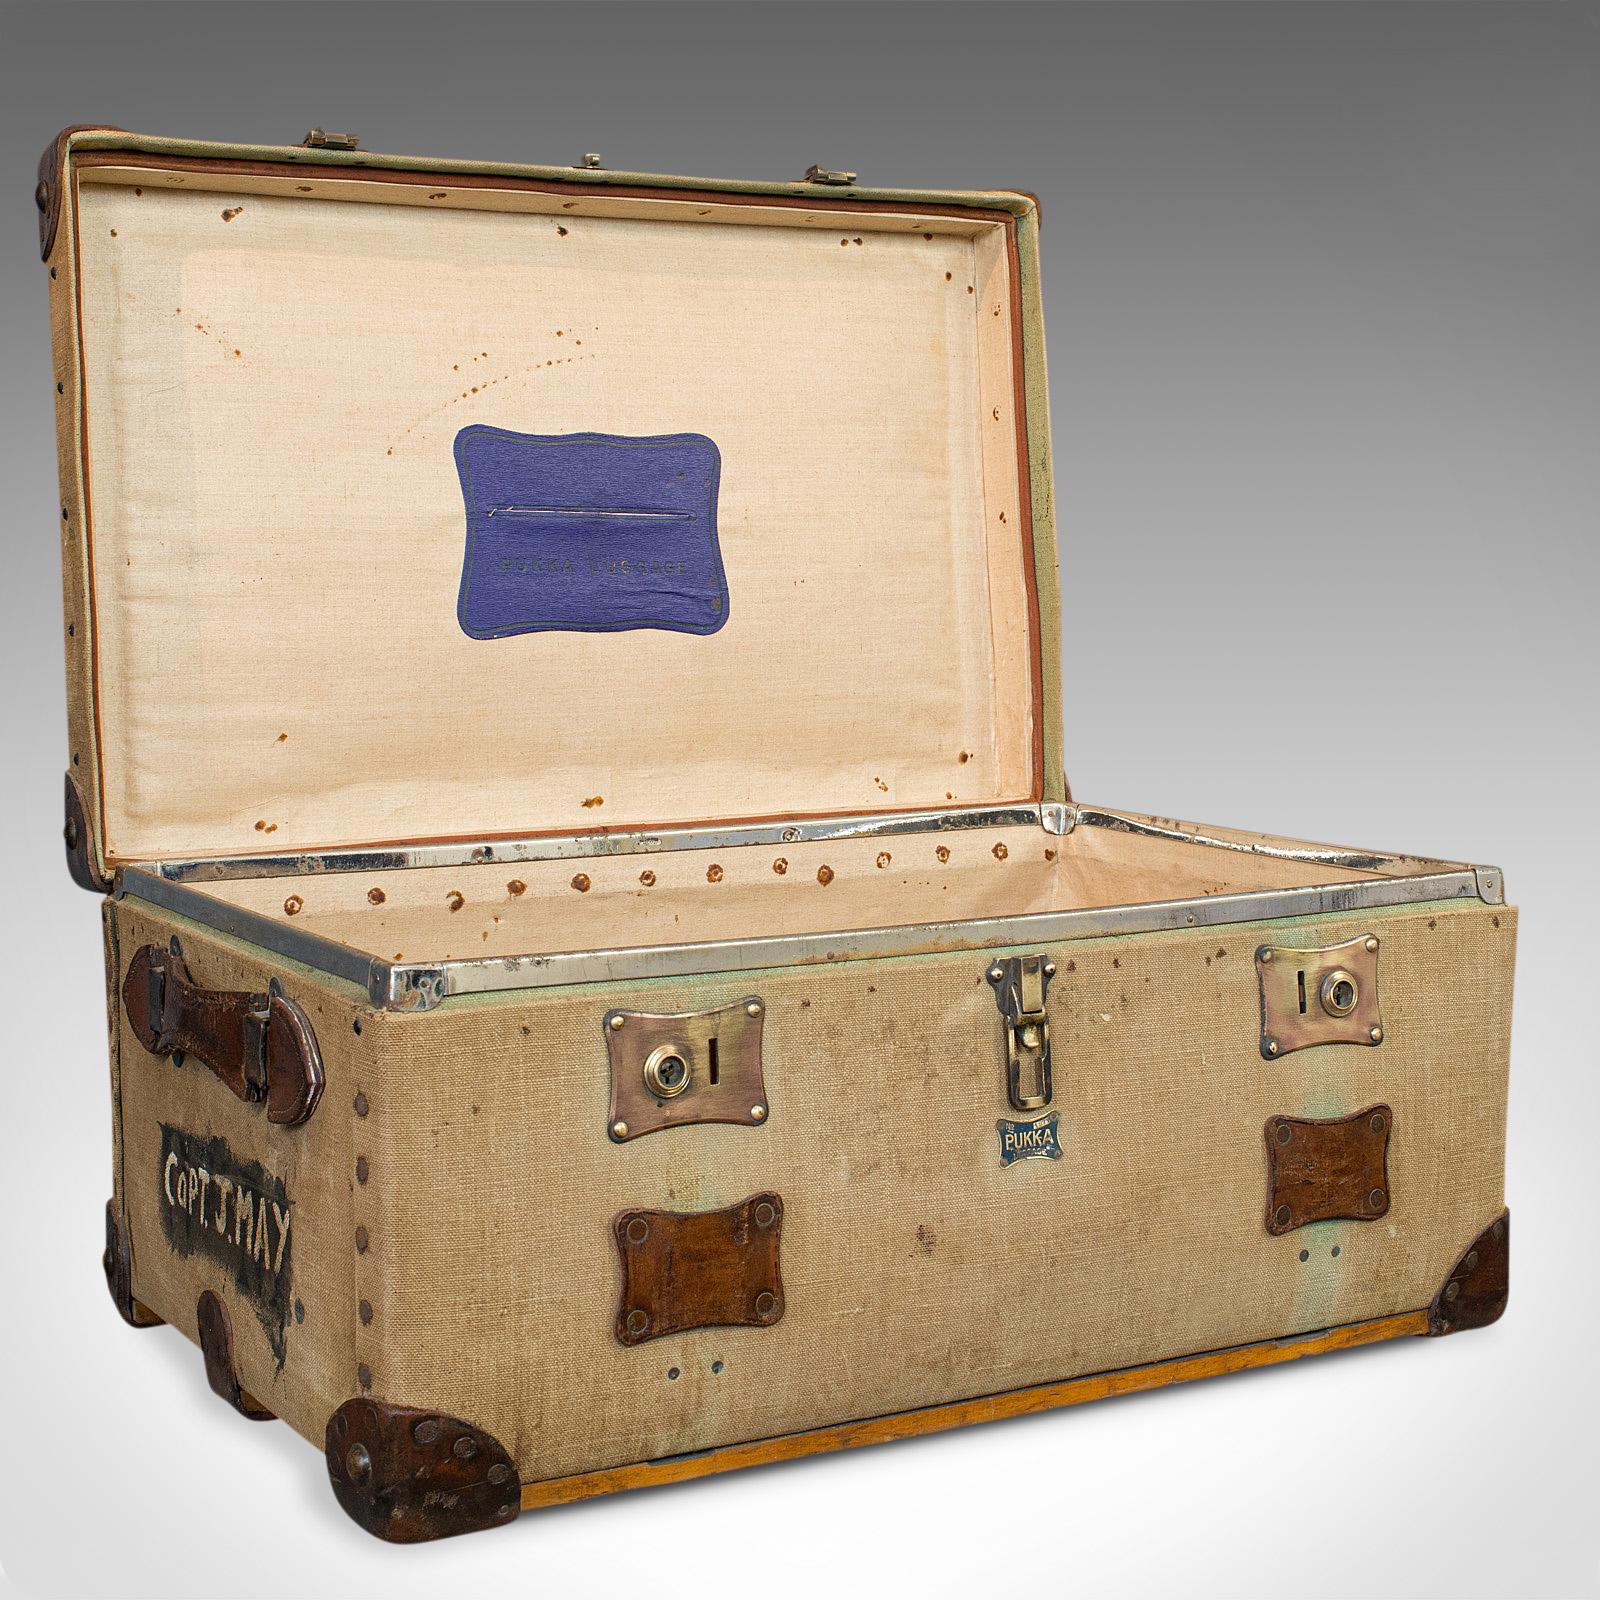 This is an antique shipping trunk. An English, canvas travel case by Pukka Luggage, dating to the Edwardian period, circa 1910.

Wonderful Edwardian style perfect for the grand tour
Displays a desirable aged patina
Quality canvas textile finish